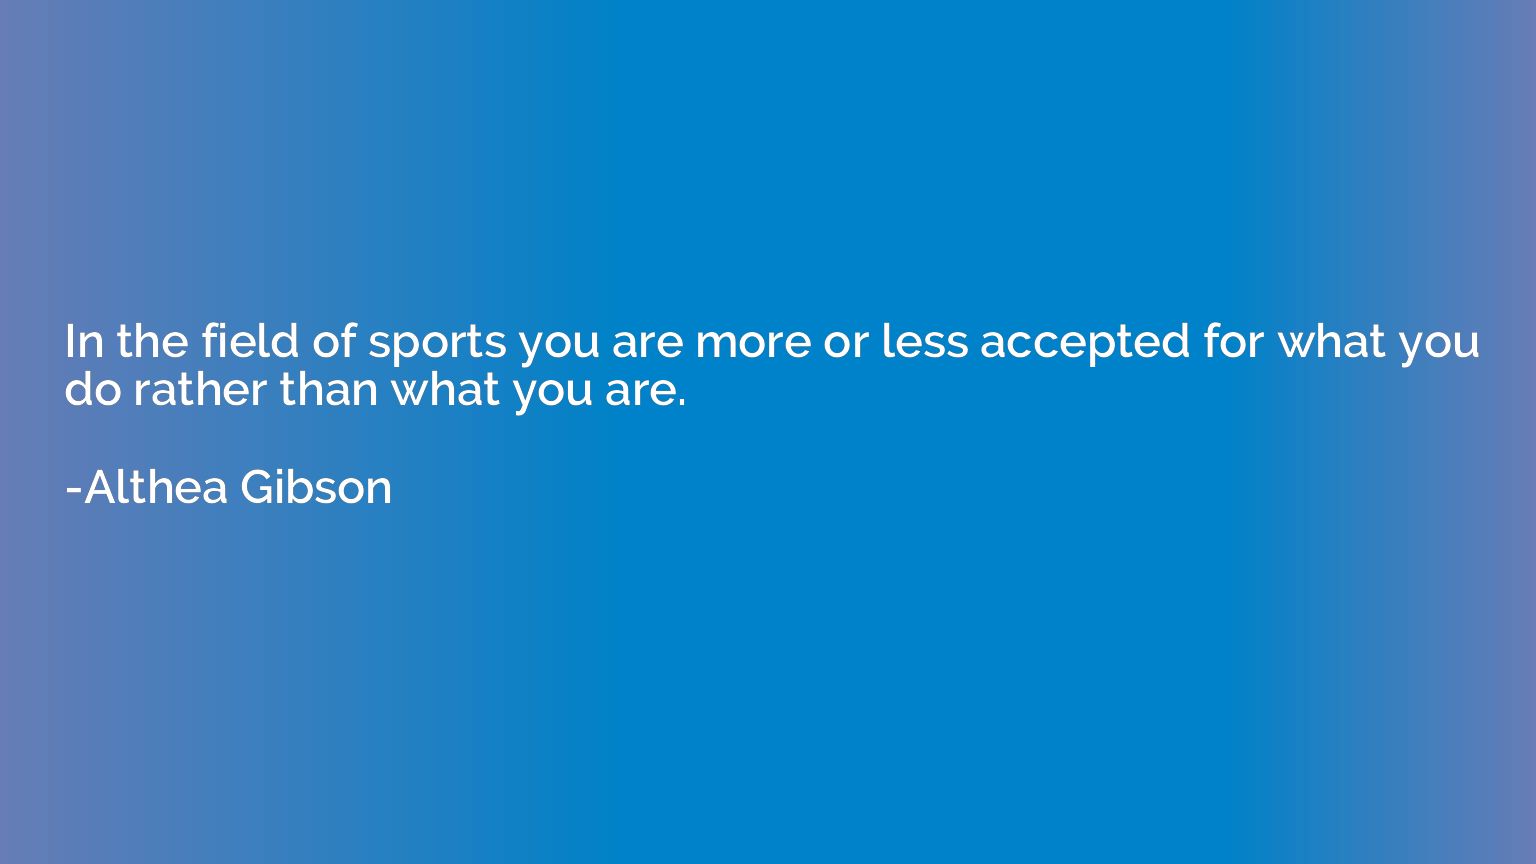 In the field of sports you are more or less accepted for wha